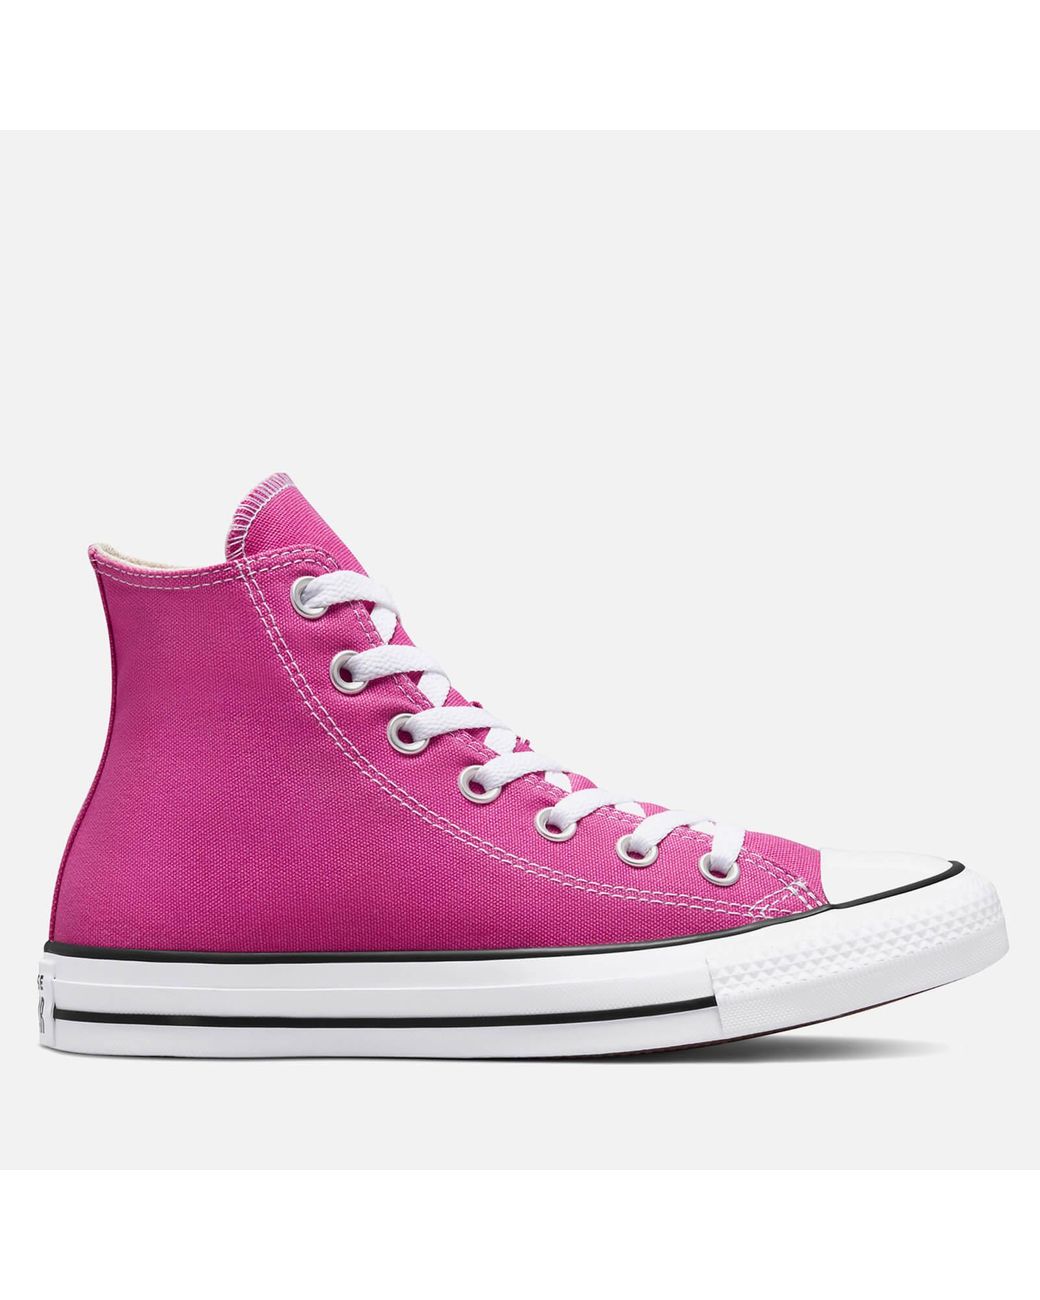 Converse Chuck Taylor All Star Hi-top Canvas Trainers in Pink | Lyst